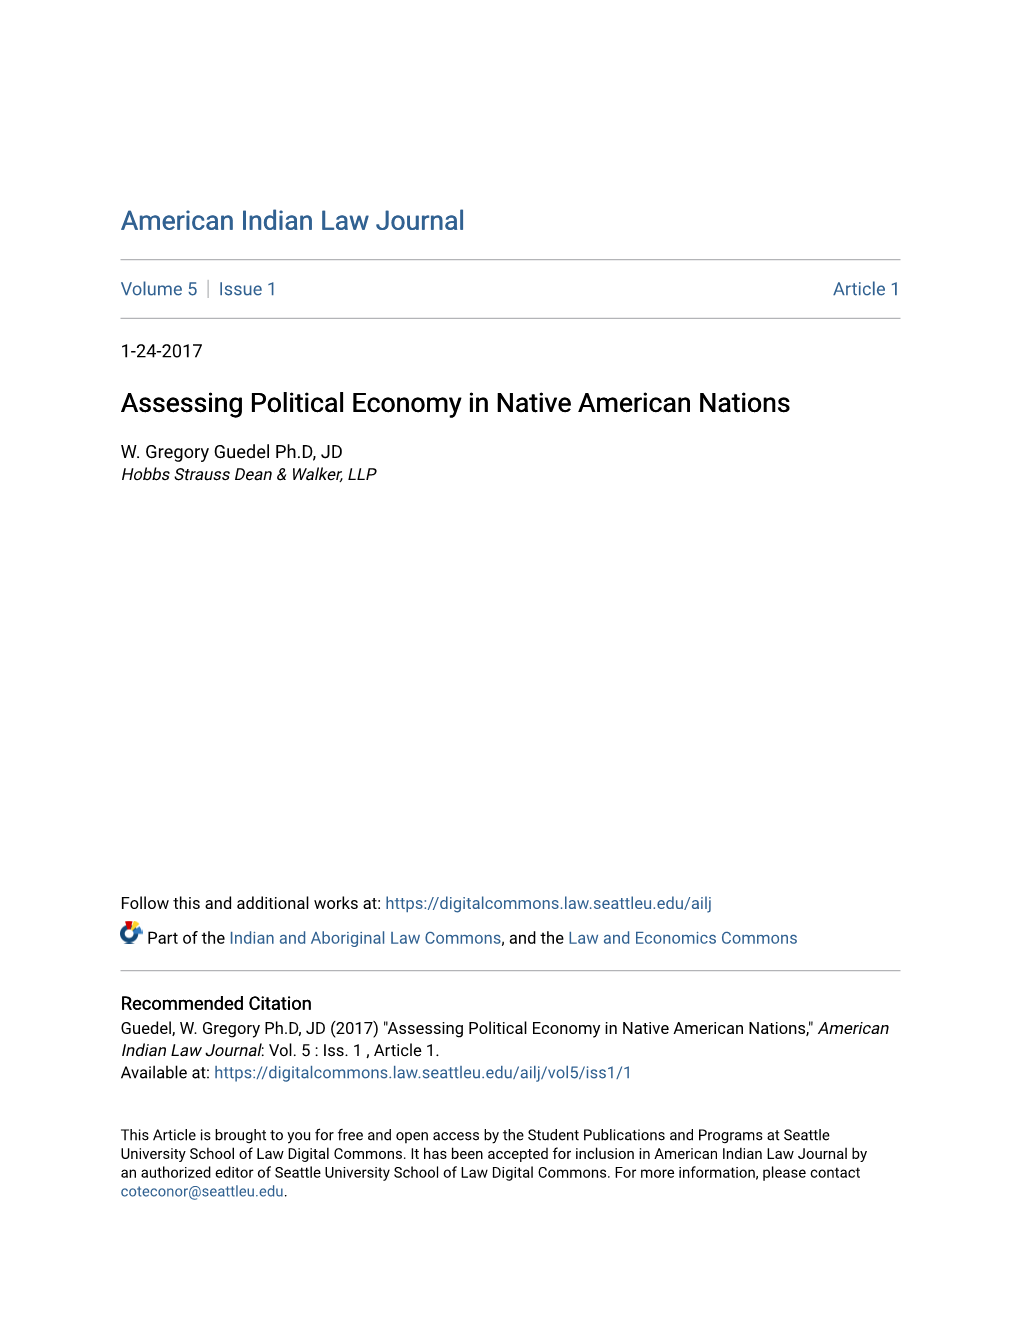 Assessing Political Economy in Native American Nations